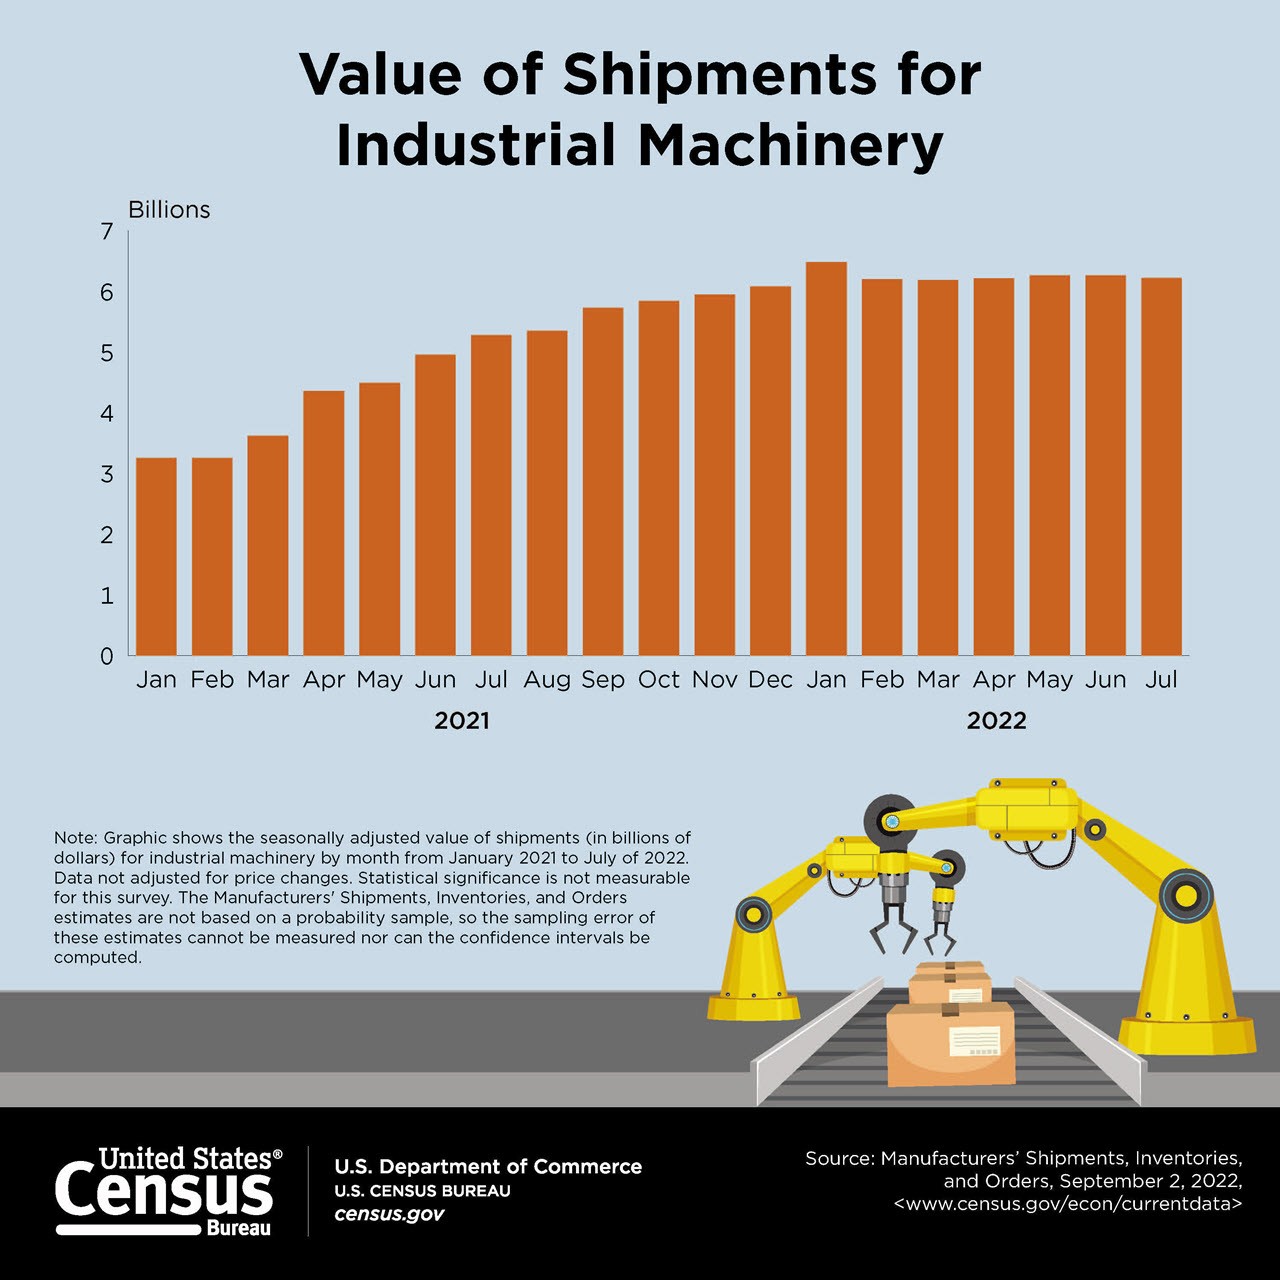 Value of Shipments for Industrial Machinery